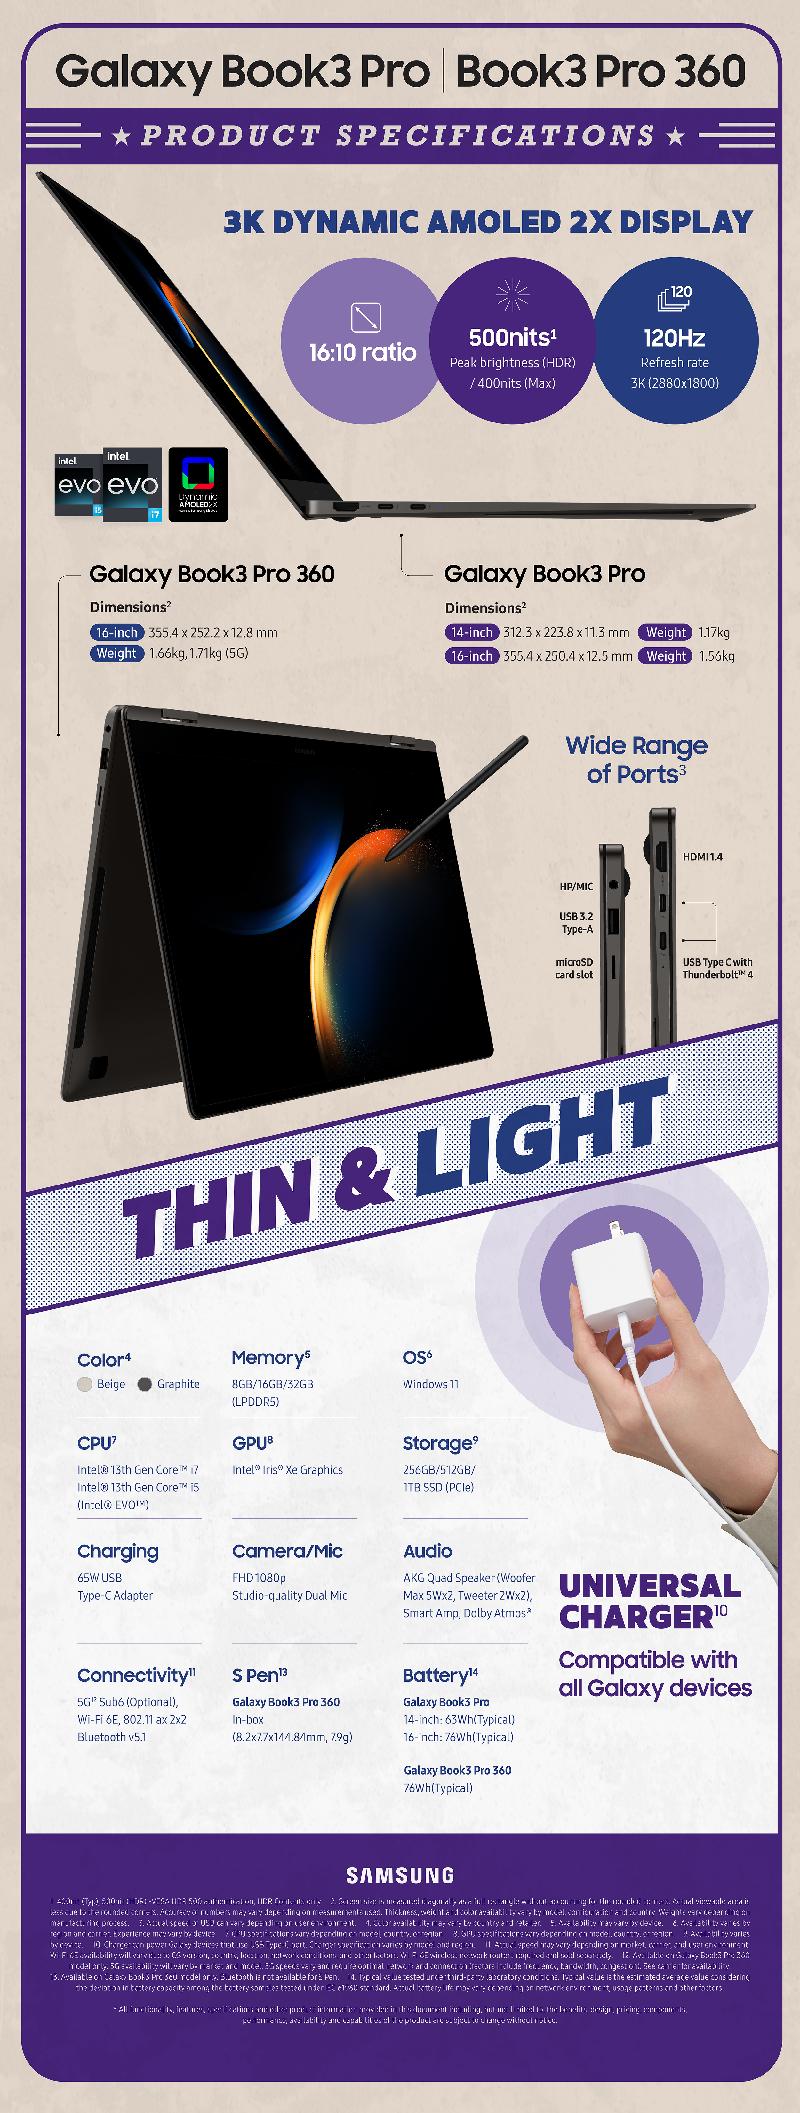 Galaxy_Book3_Pro_360_Book3_Pro_Infographic_Product Specifications.jpg